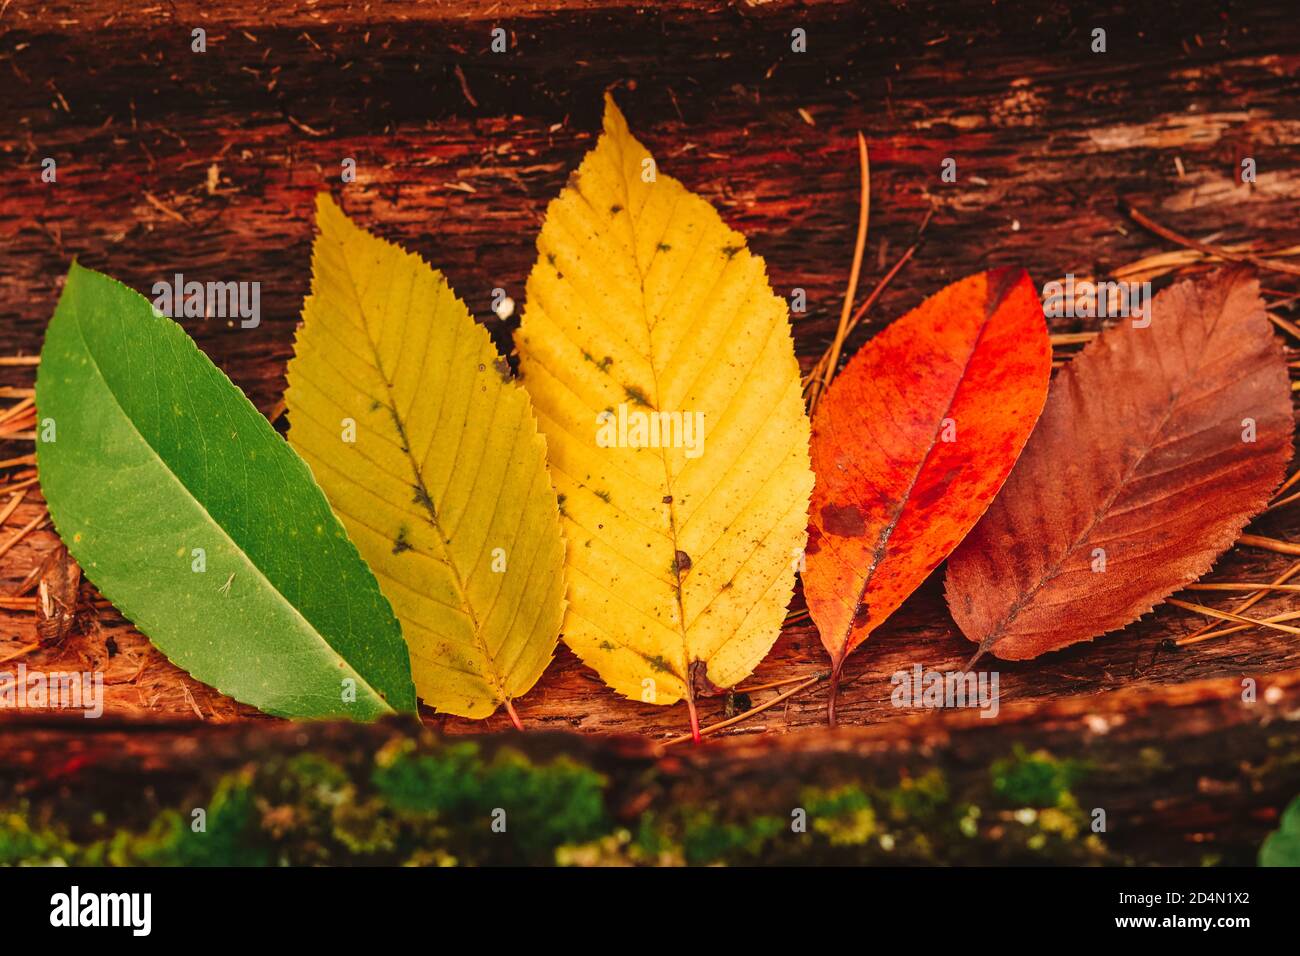 Beauty of fall season nature: Autumn concept of leaves life cycle colorful leaves from green to yellow, red and brown Stock Photo